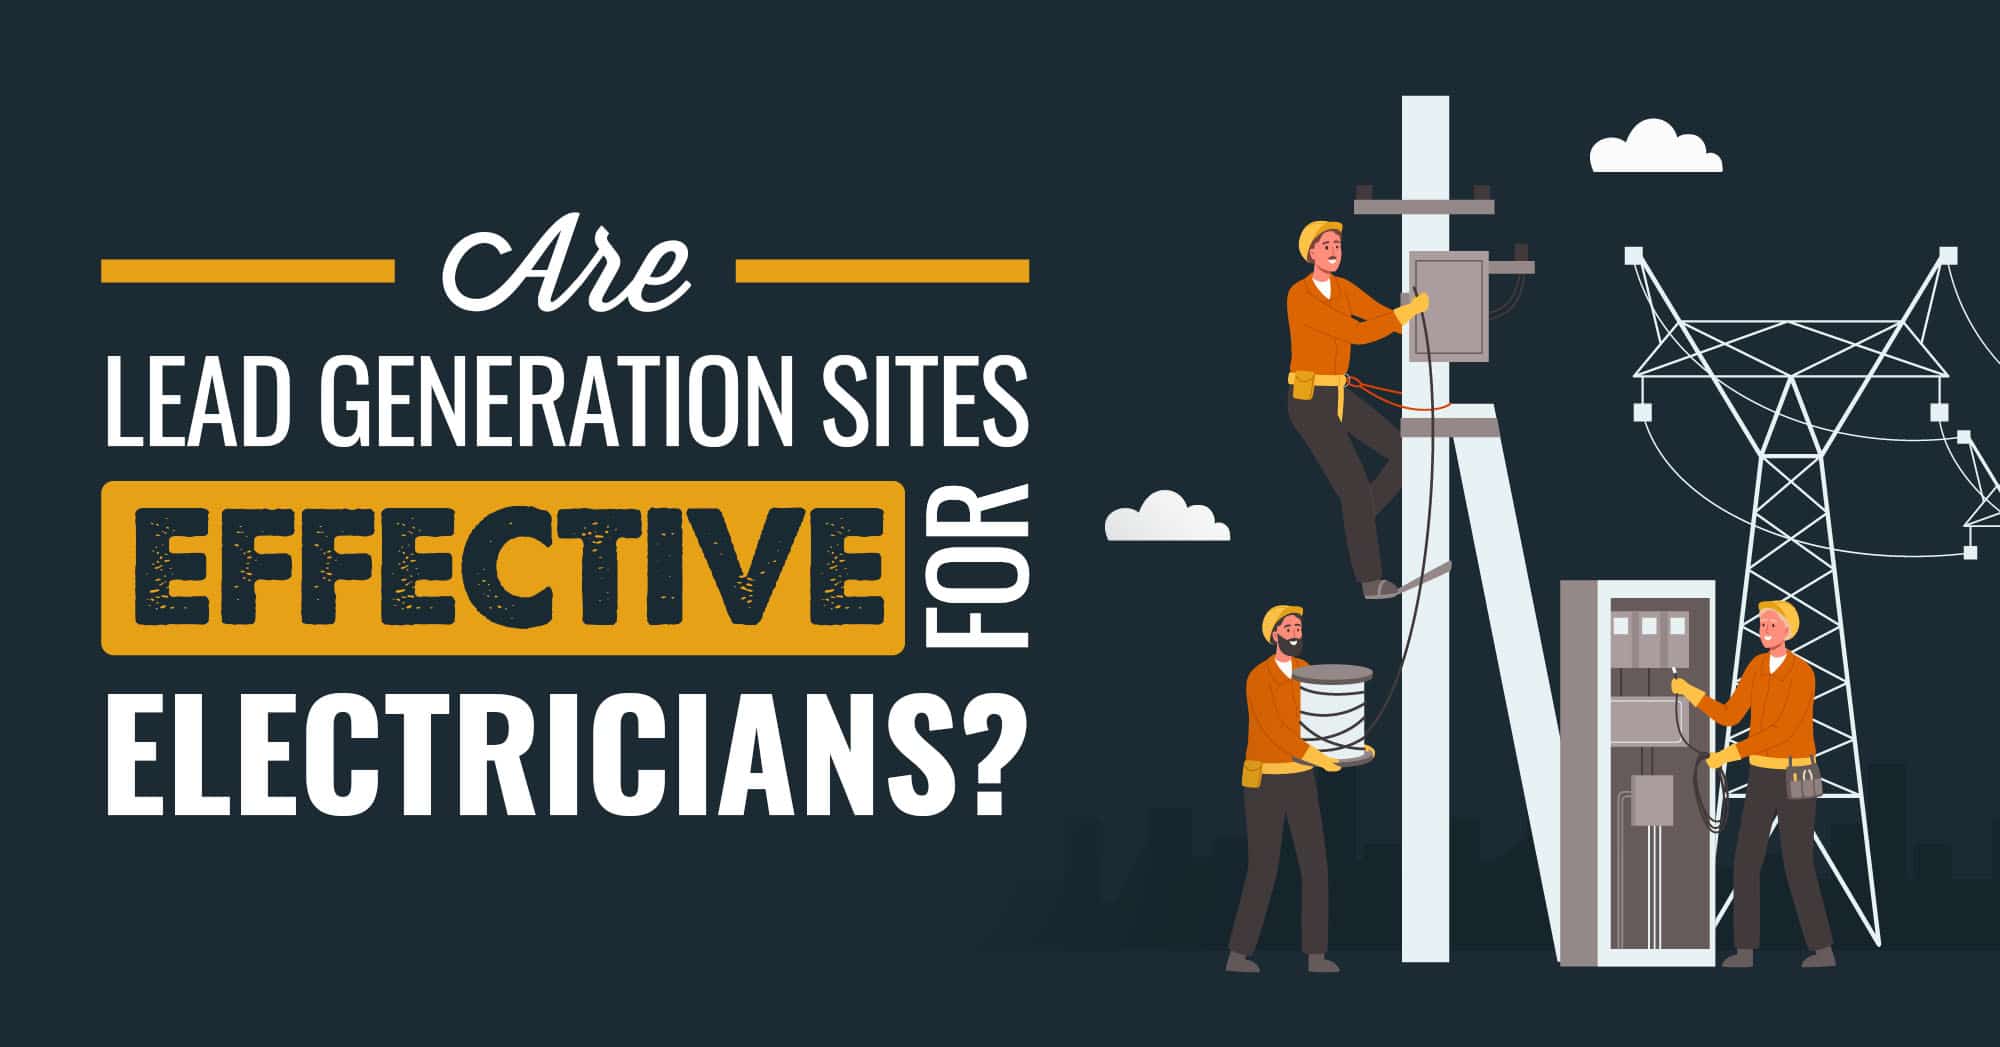 Are lead generation sites effective for electricians?